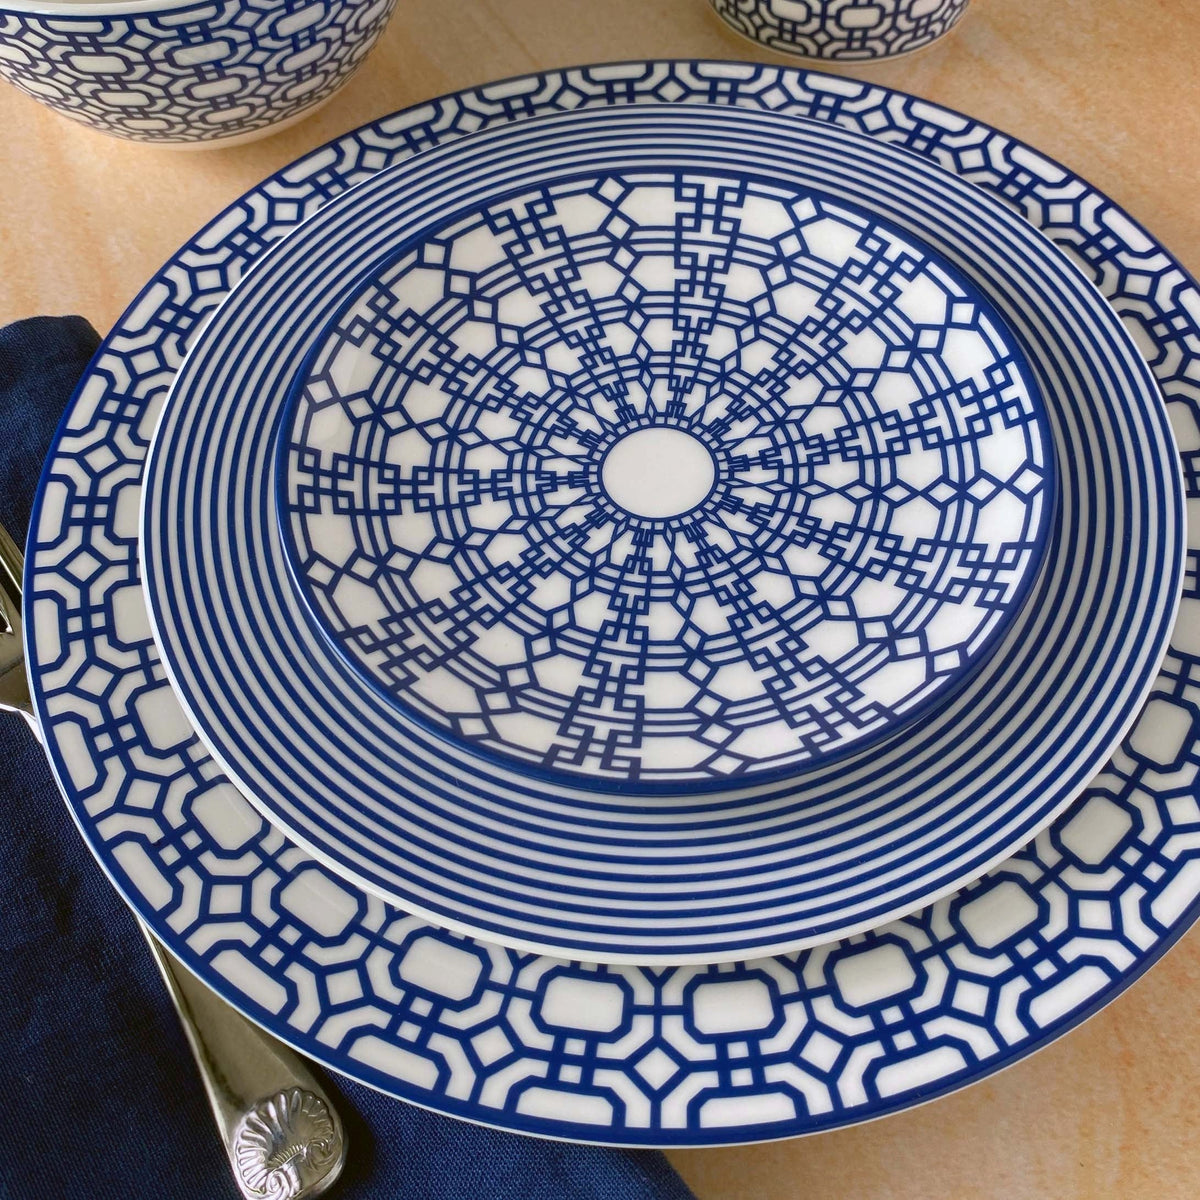 A set of blue and white plates with an intricate interlocking lattice pattern, stacked on a table beside a dark blue napkin and silverware, showcases the Newport Small Plates collection from Caskata Artisanal Home made from premium porcelain.